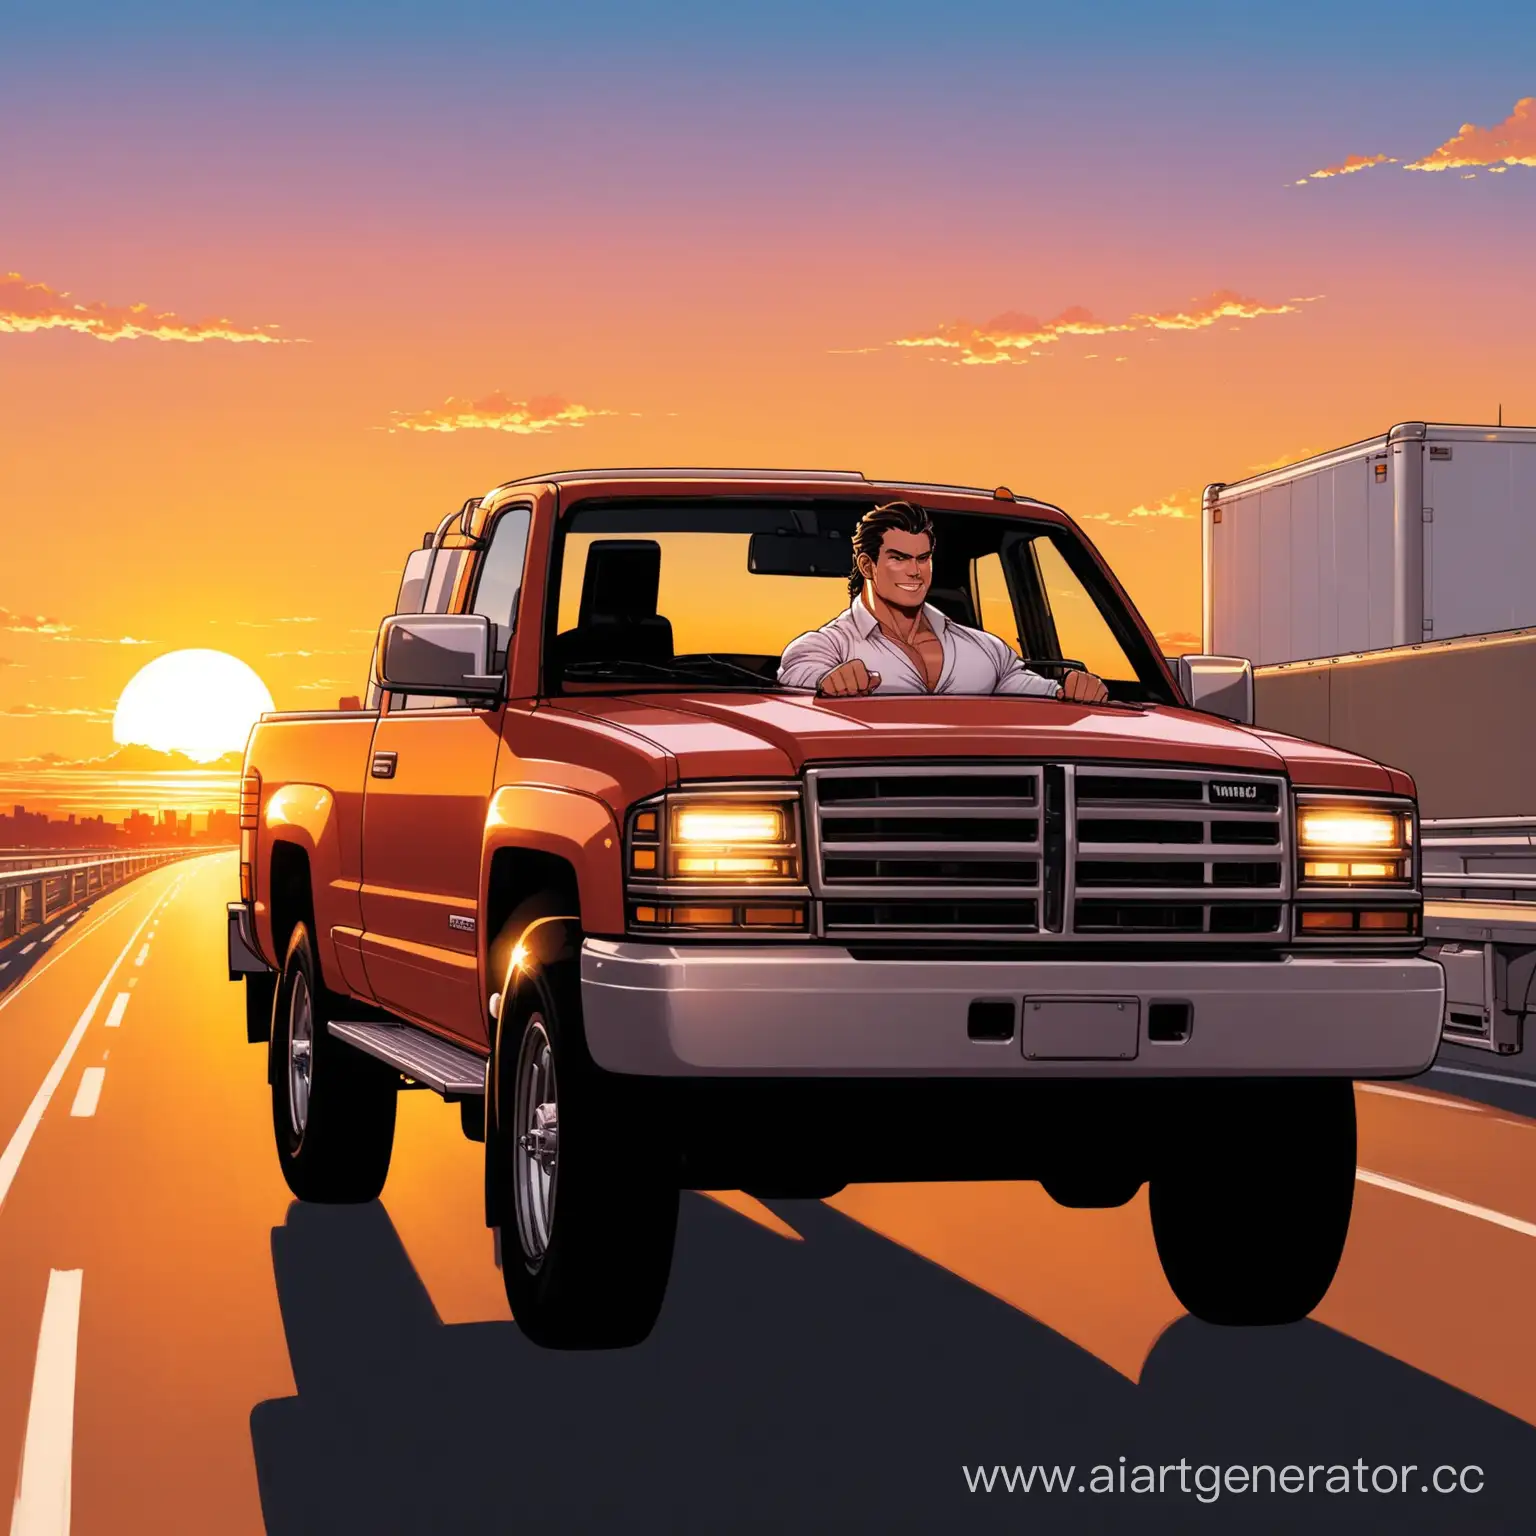 Wealthy-Man-Relaxing-in-Luxurious-Truck-at-Sunset-on-Highway